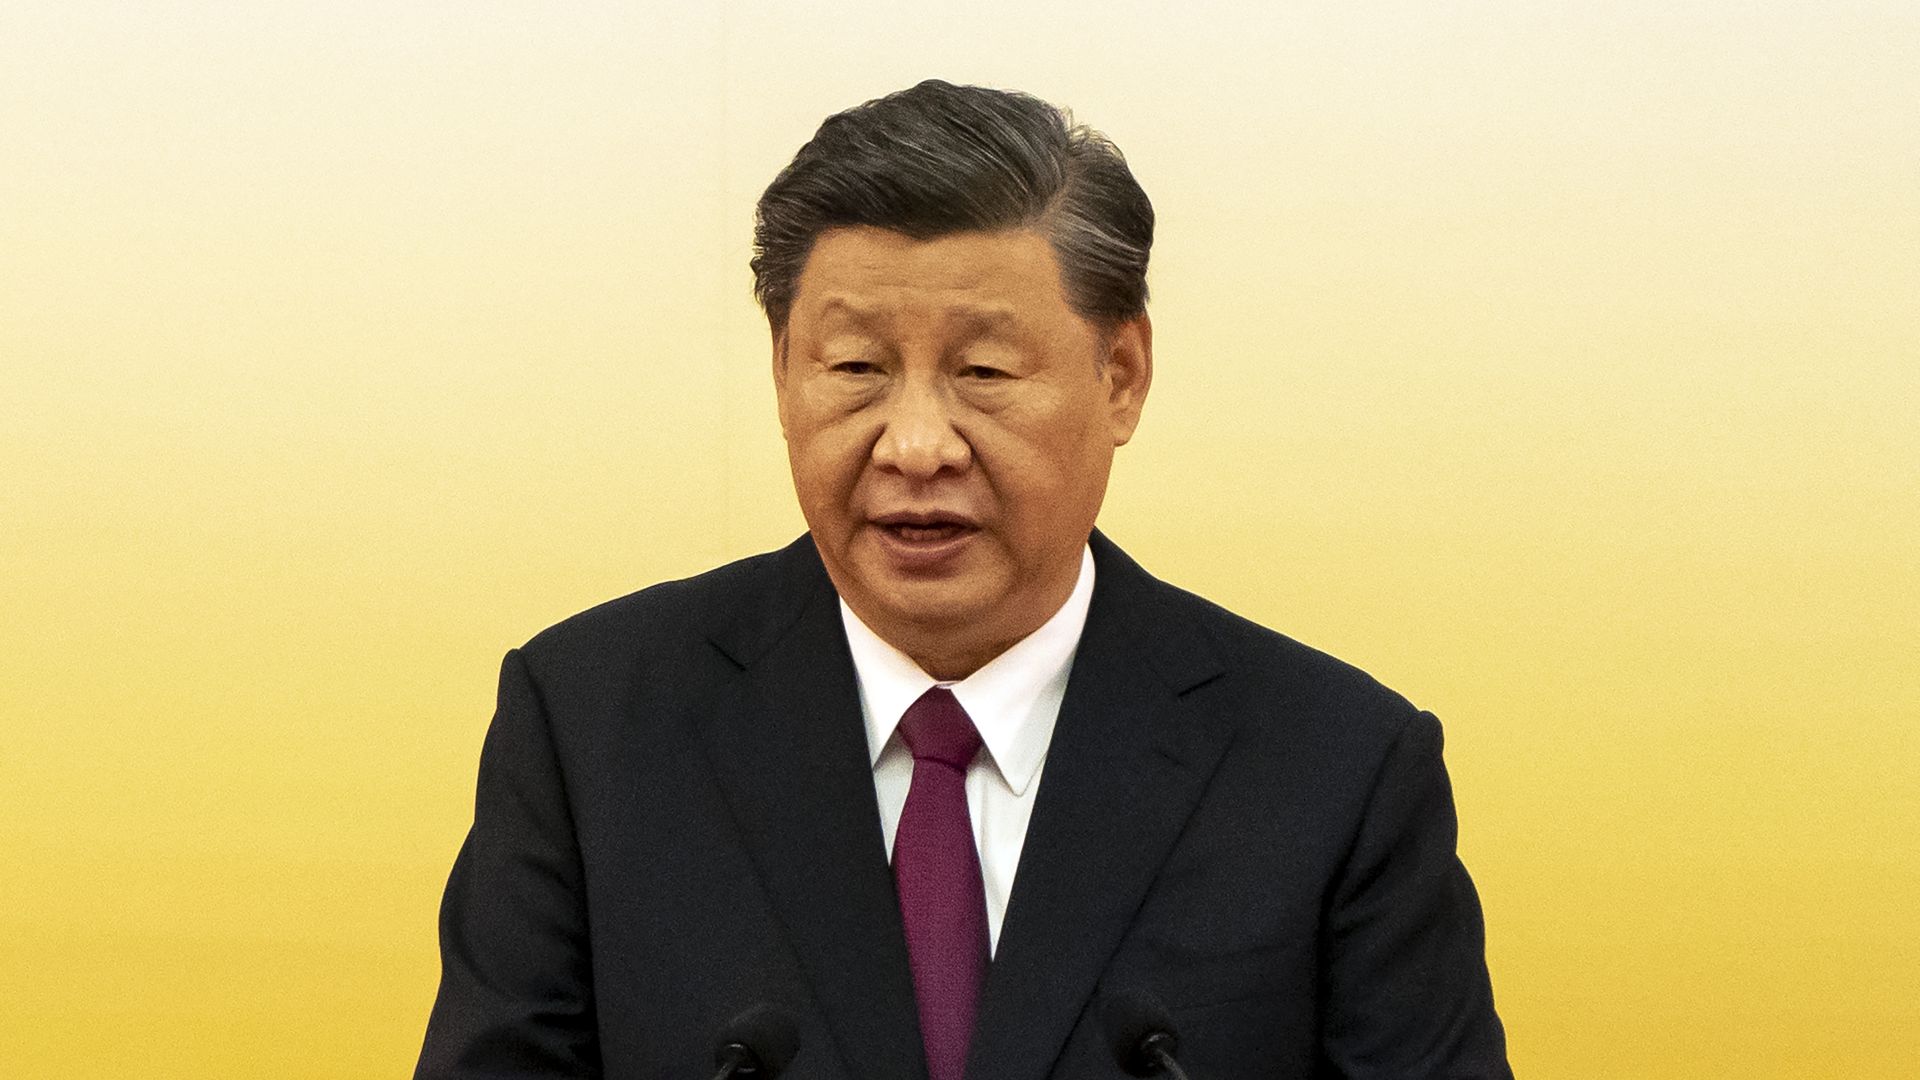 Xi Jinping, China's president, during a ceremony in Hong Kong on July 1.